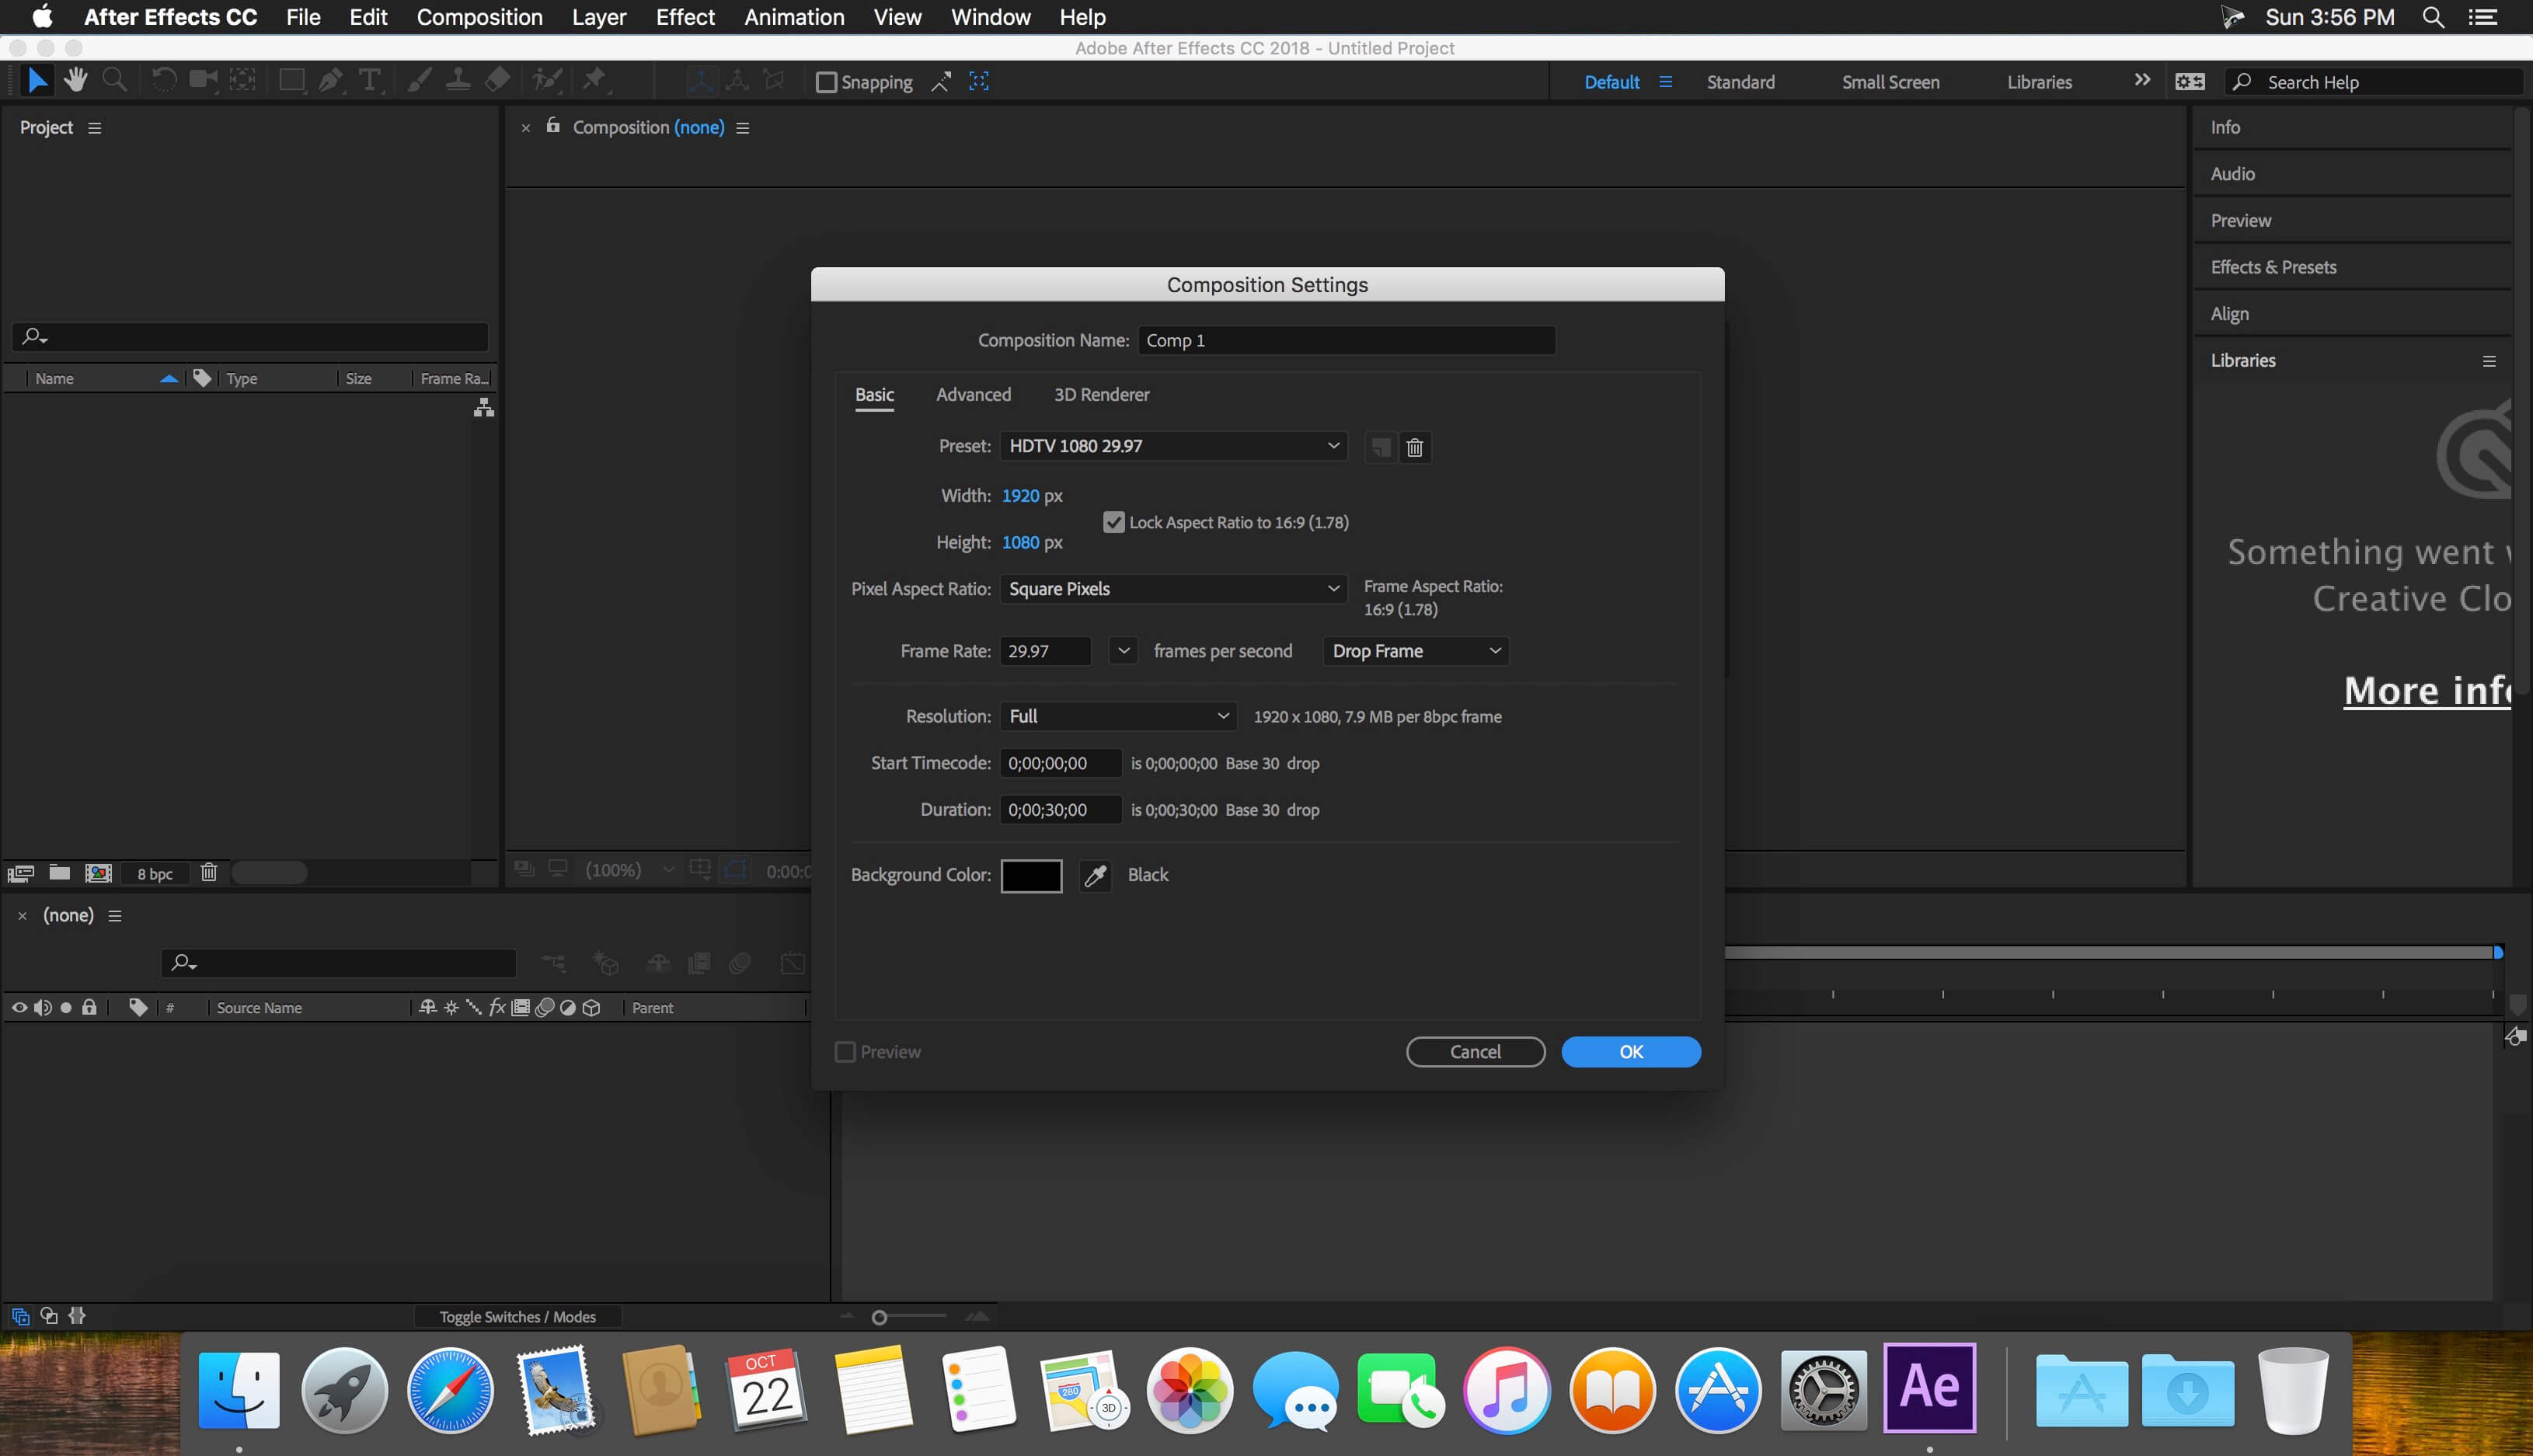 adobe after effects 7.0 free download mac